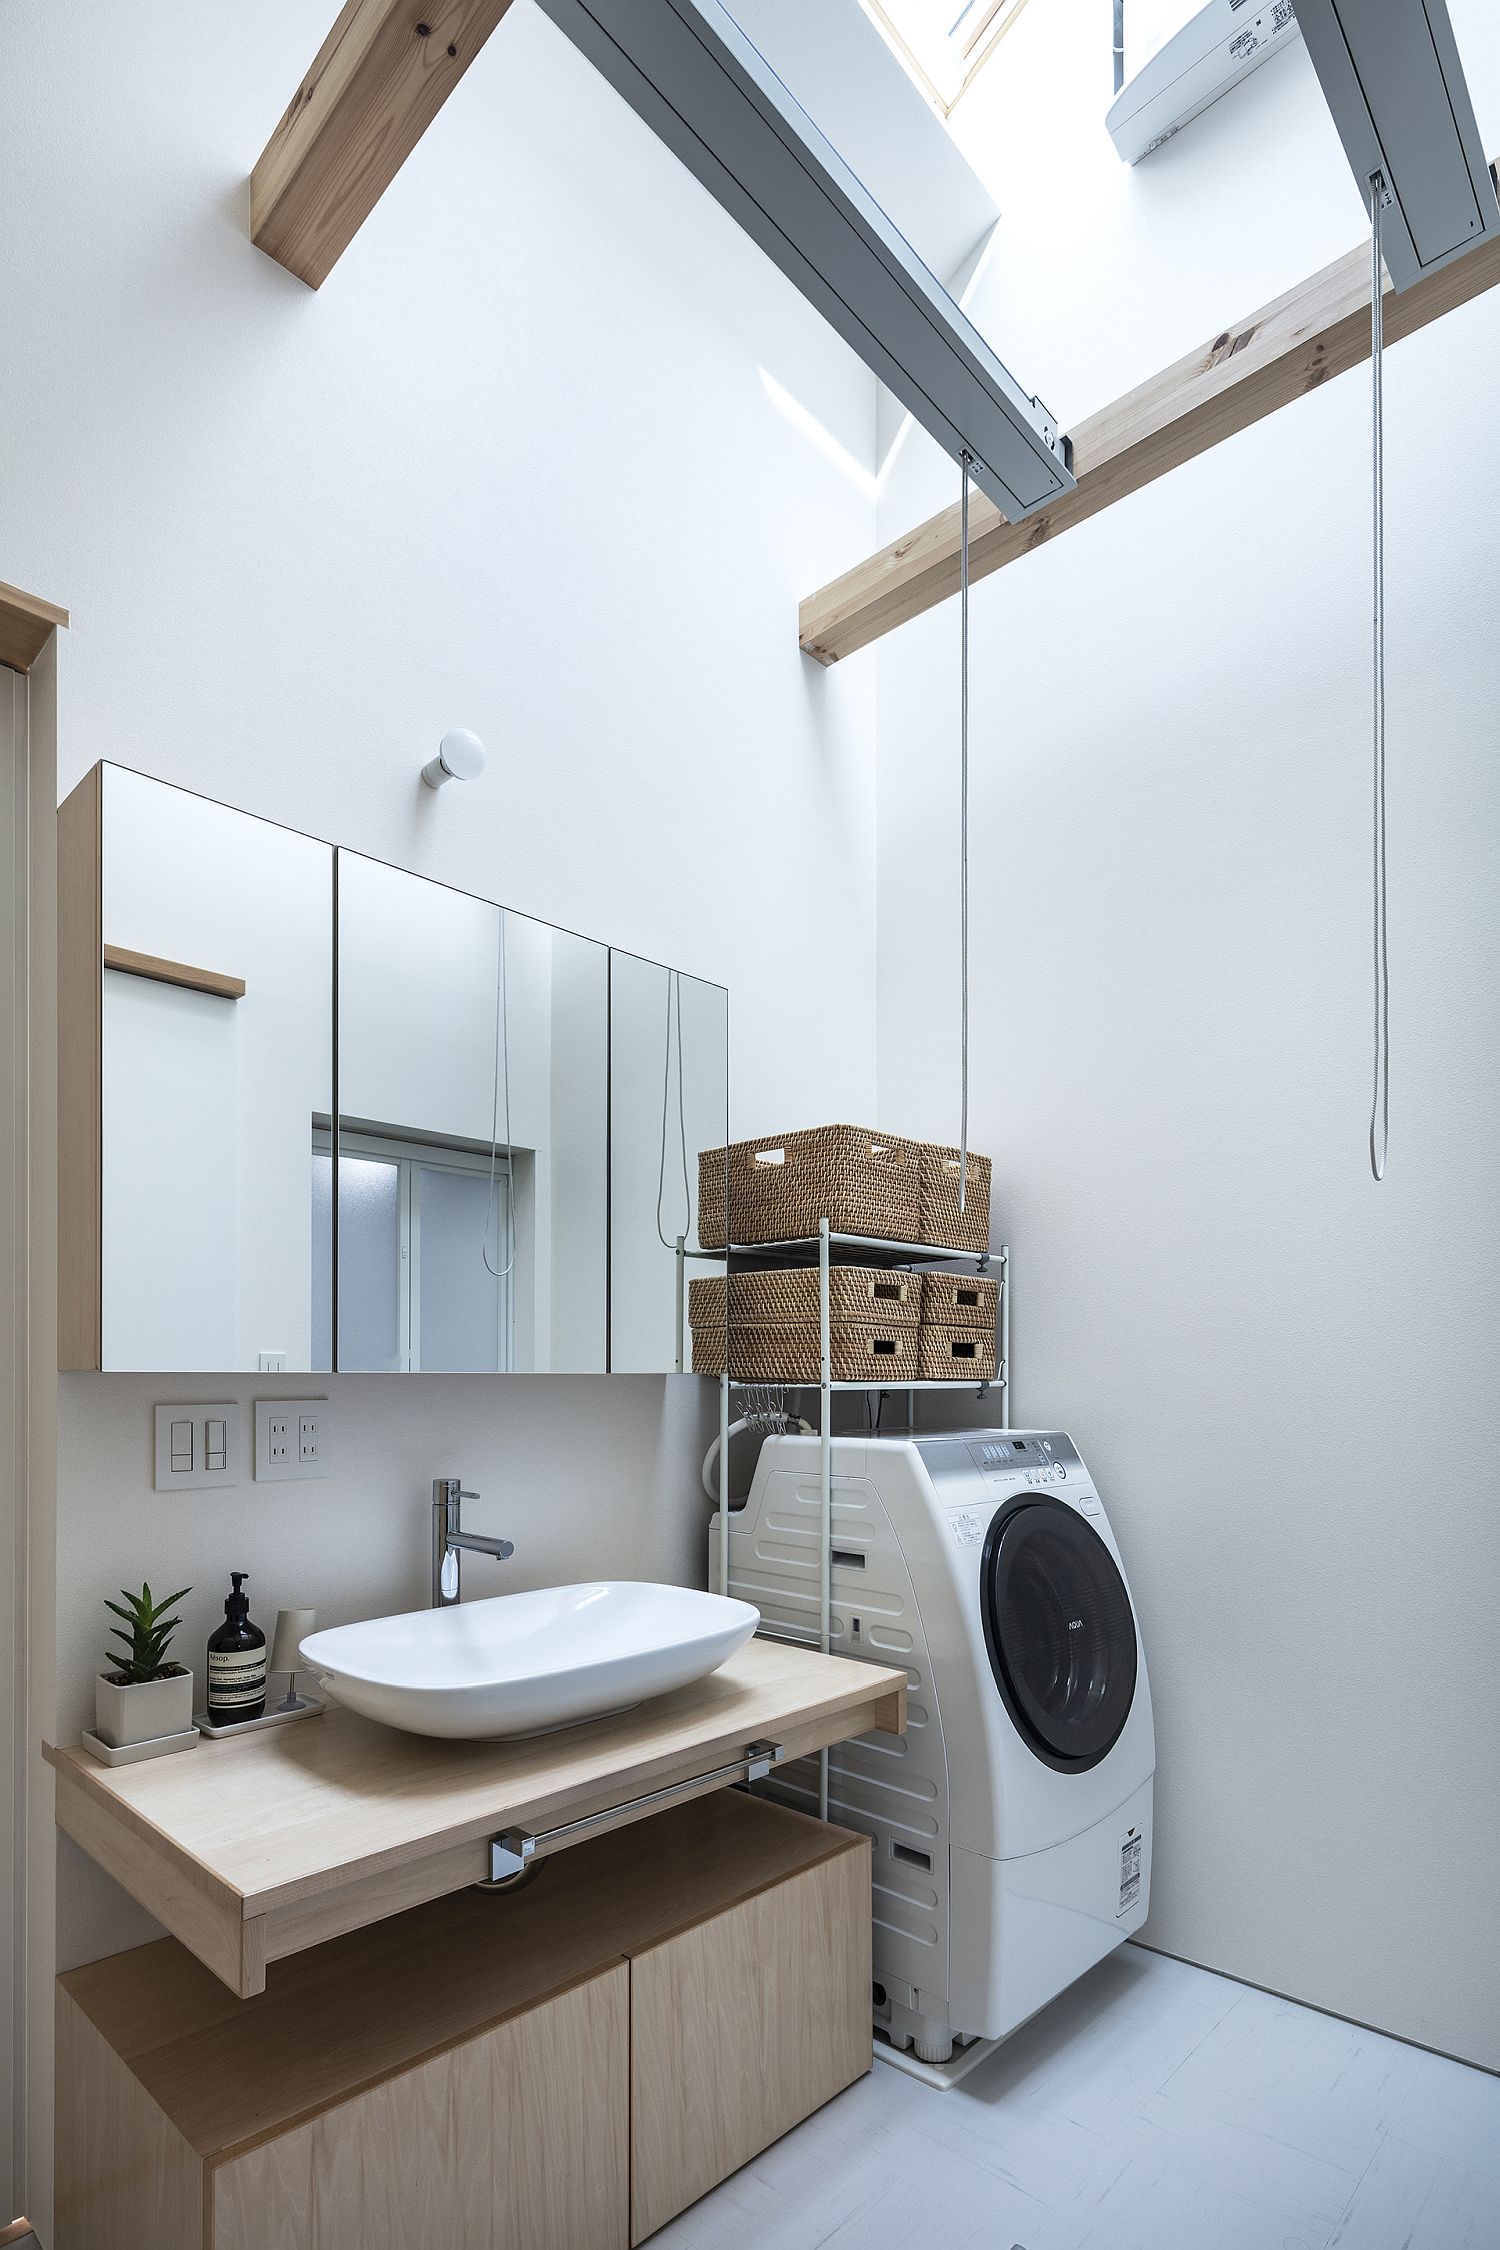 Bathroom-in-white-with-wooden-beams-and-skylight